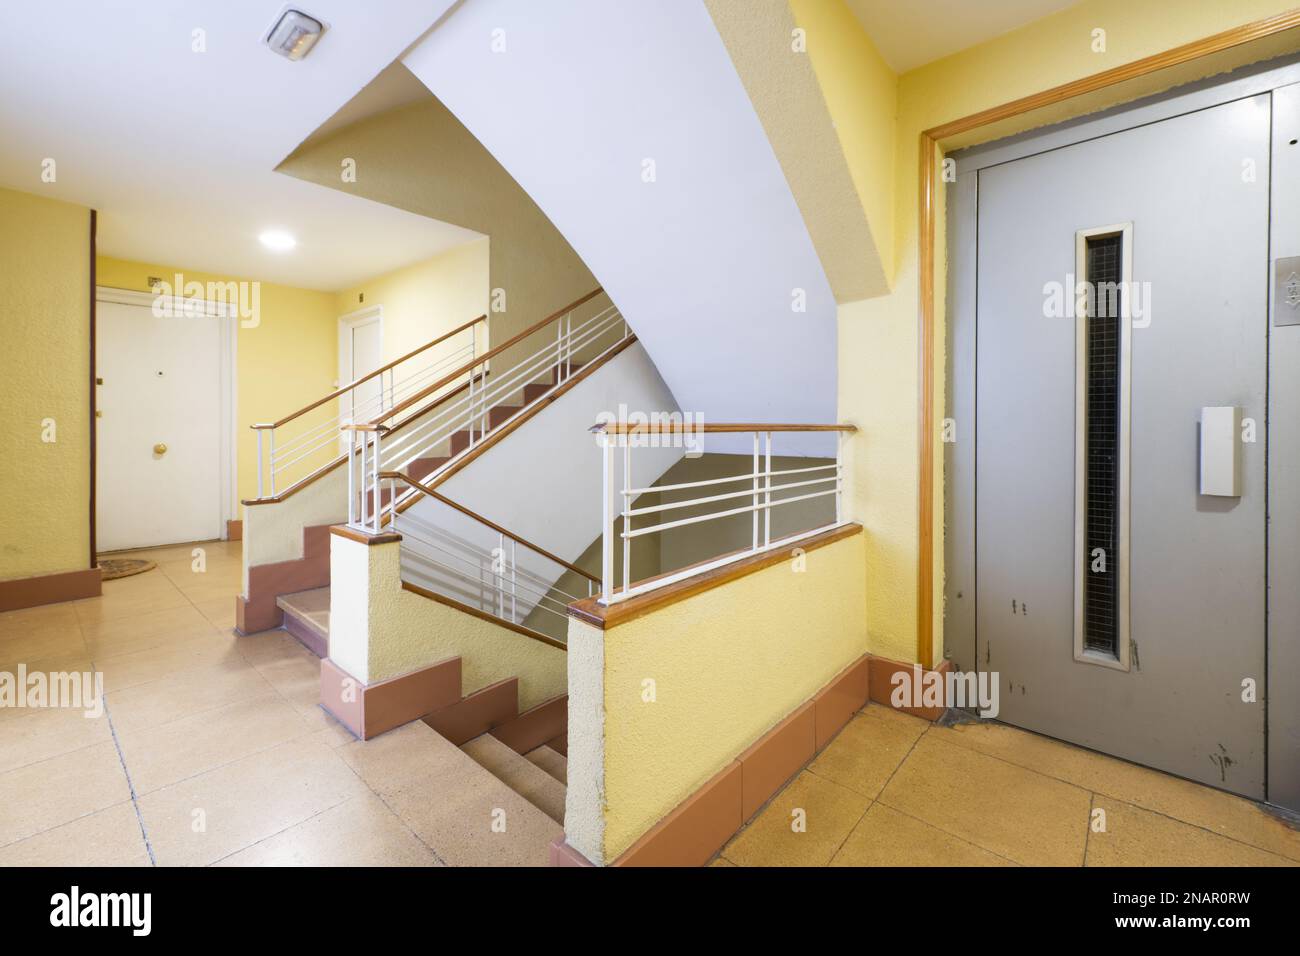 Elevator area of an old residential building with central stairs with white metal and wooden railings Stock Photo